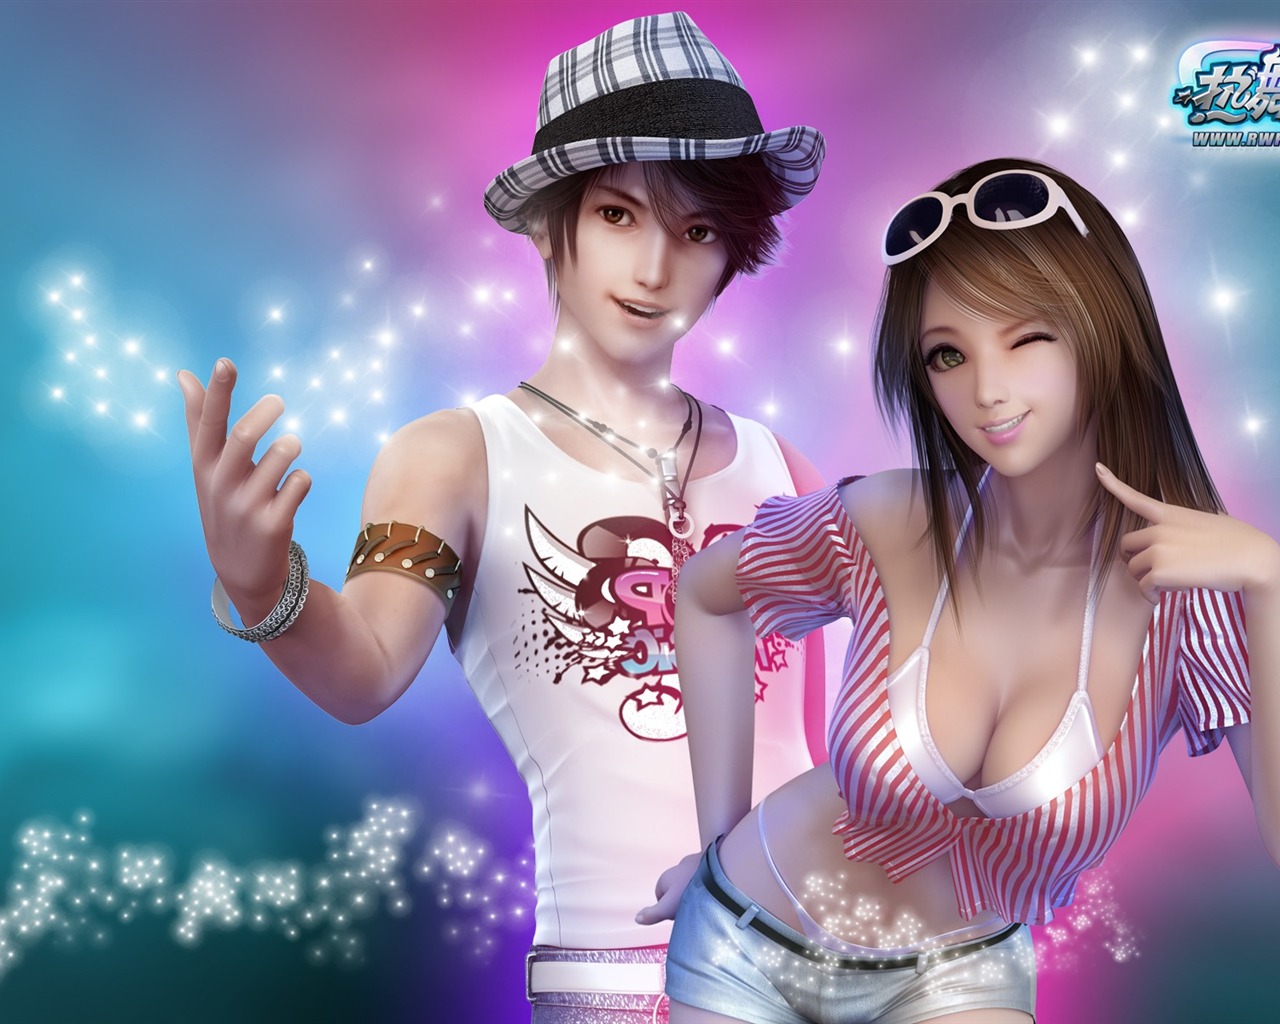 Online game Hot Dance Party II official wallpapers #6 - 1280x1024